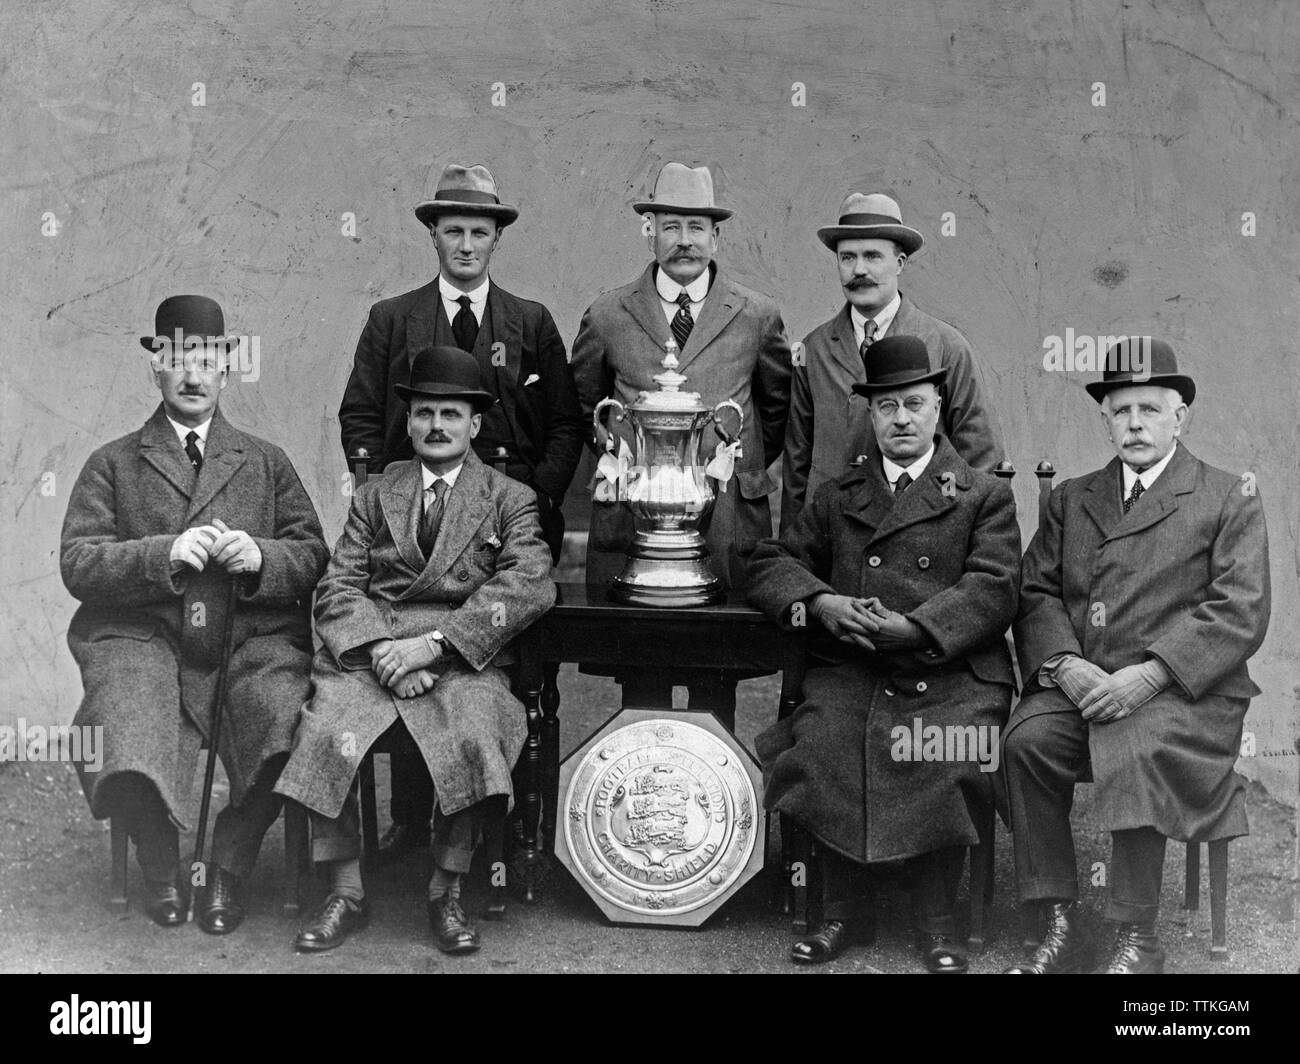 A vintage black and white photograph showing members of the English Football Association with the FA Cup trophy and Charity Shield. Photograph taken during the 1920s or 1930s. Stock Photo